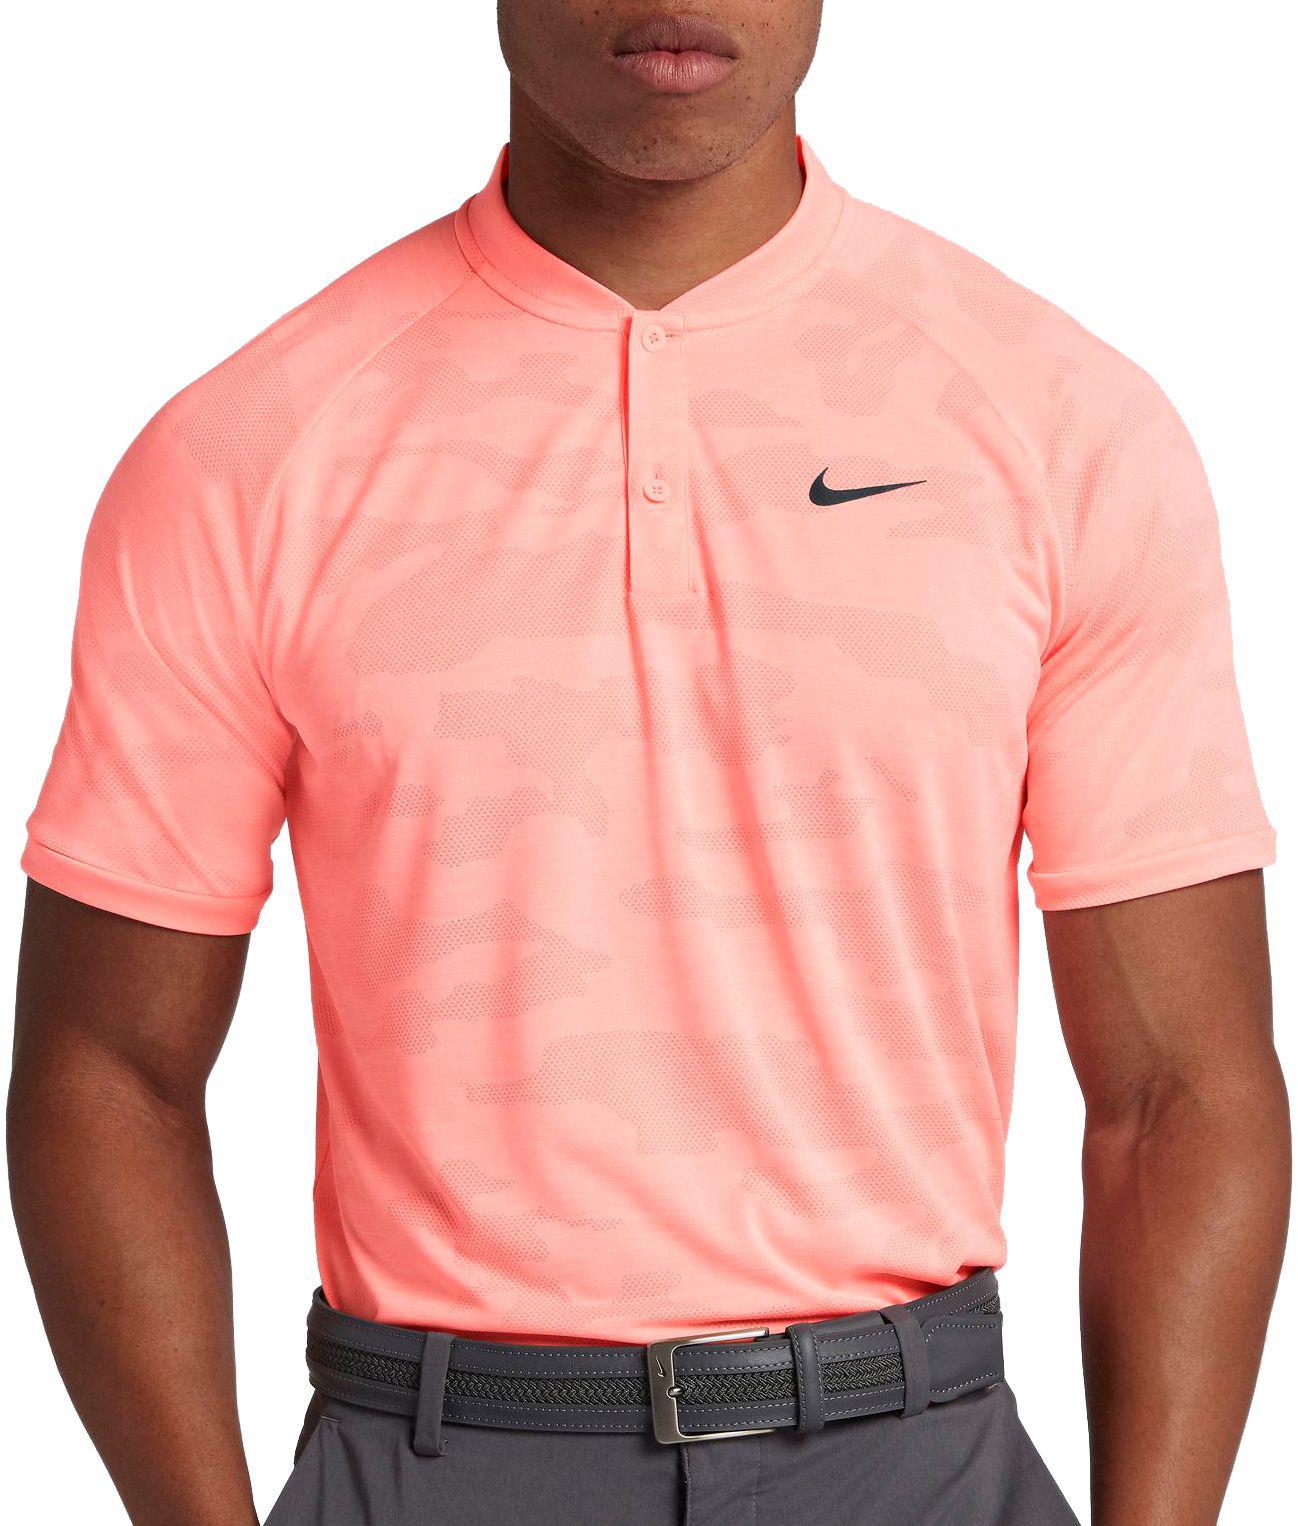 tiger woods pink and white golf shirt 